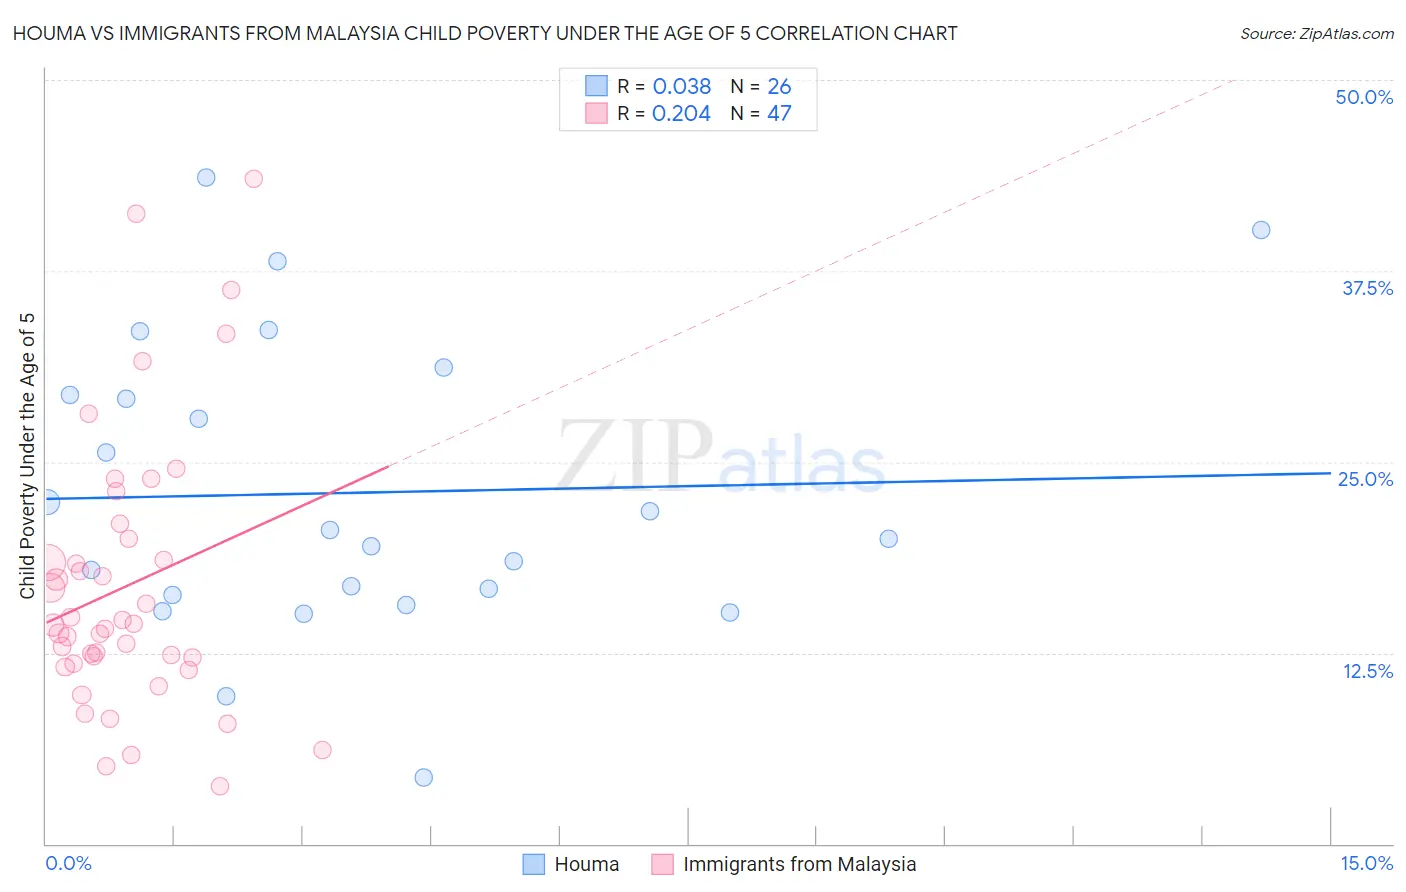 Houma vs Immigrants from Malaysia Child Poverty Under the Age of 5